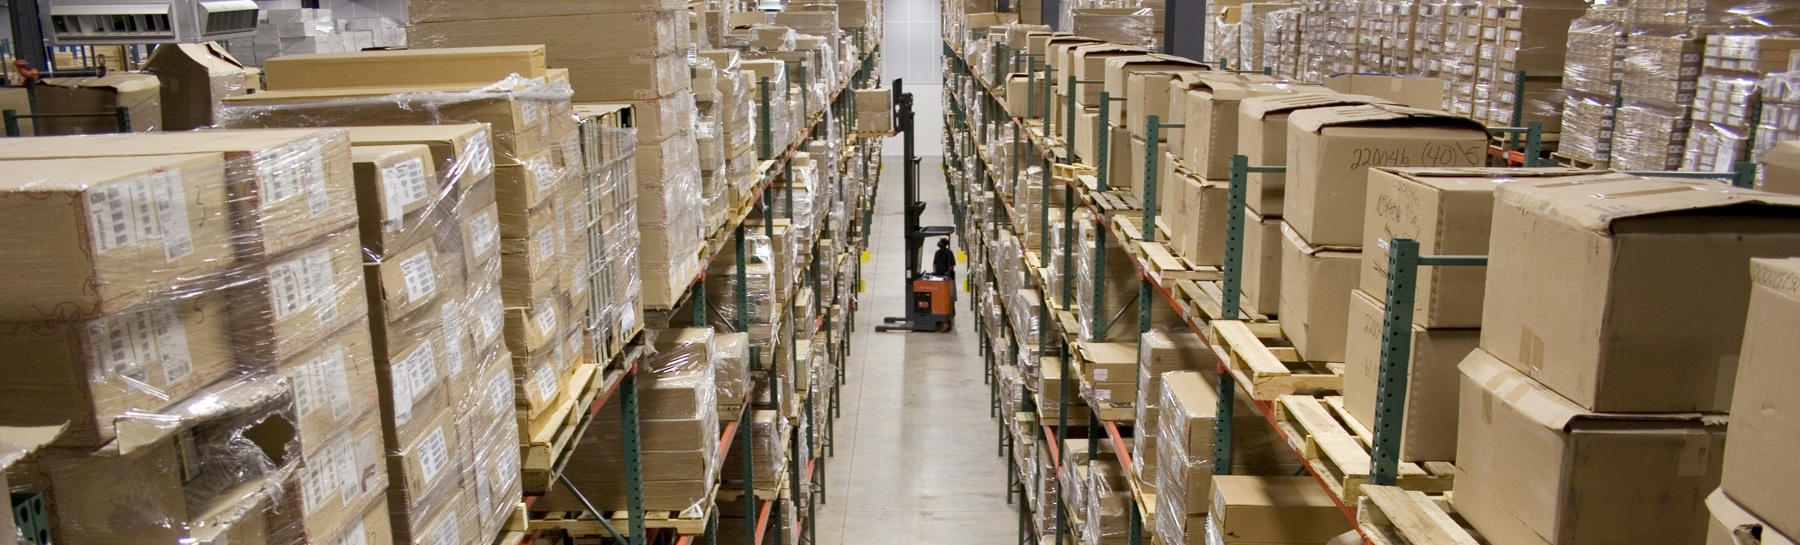 Repackaging services and trusted 3PL providers fulfillment specialists